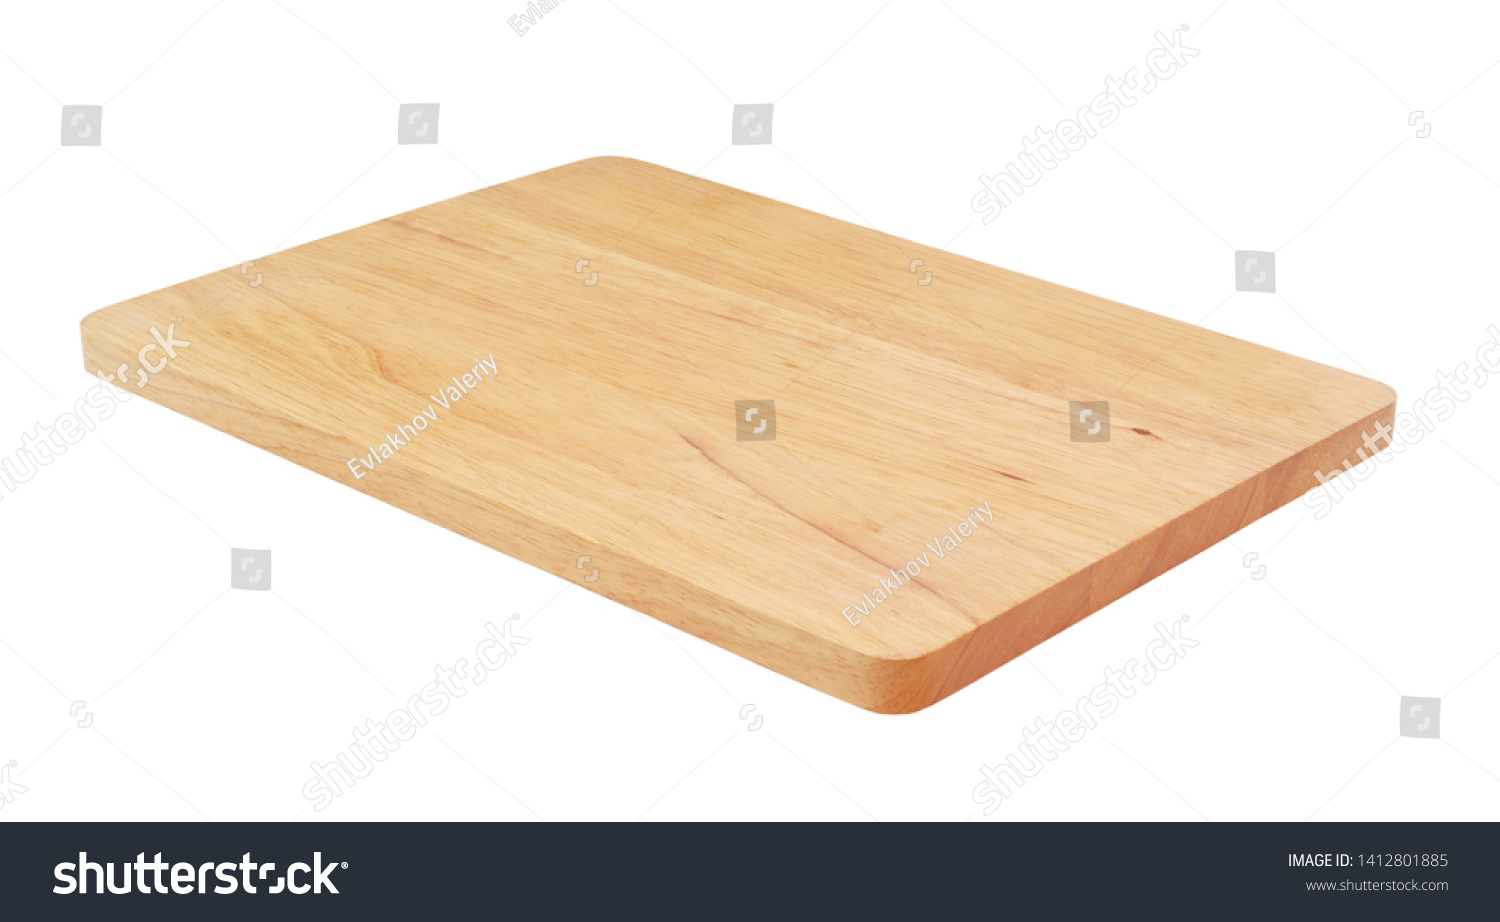 Wooden cutting board isolated on white background #1412801885